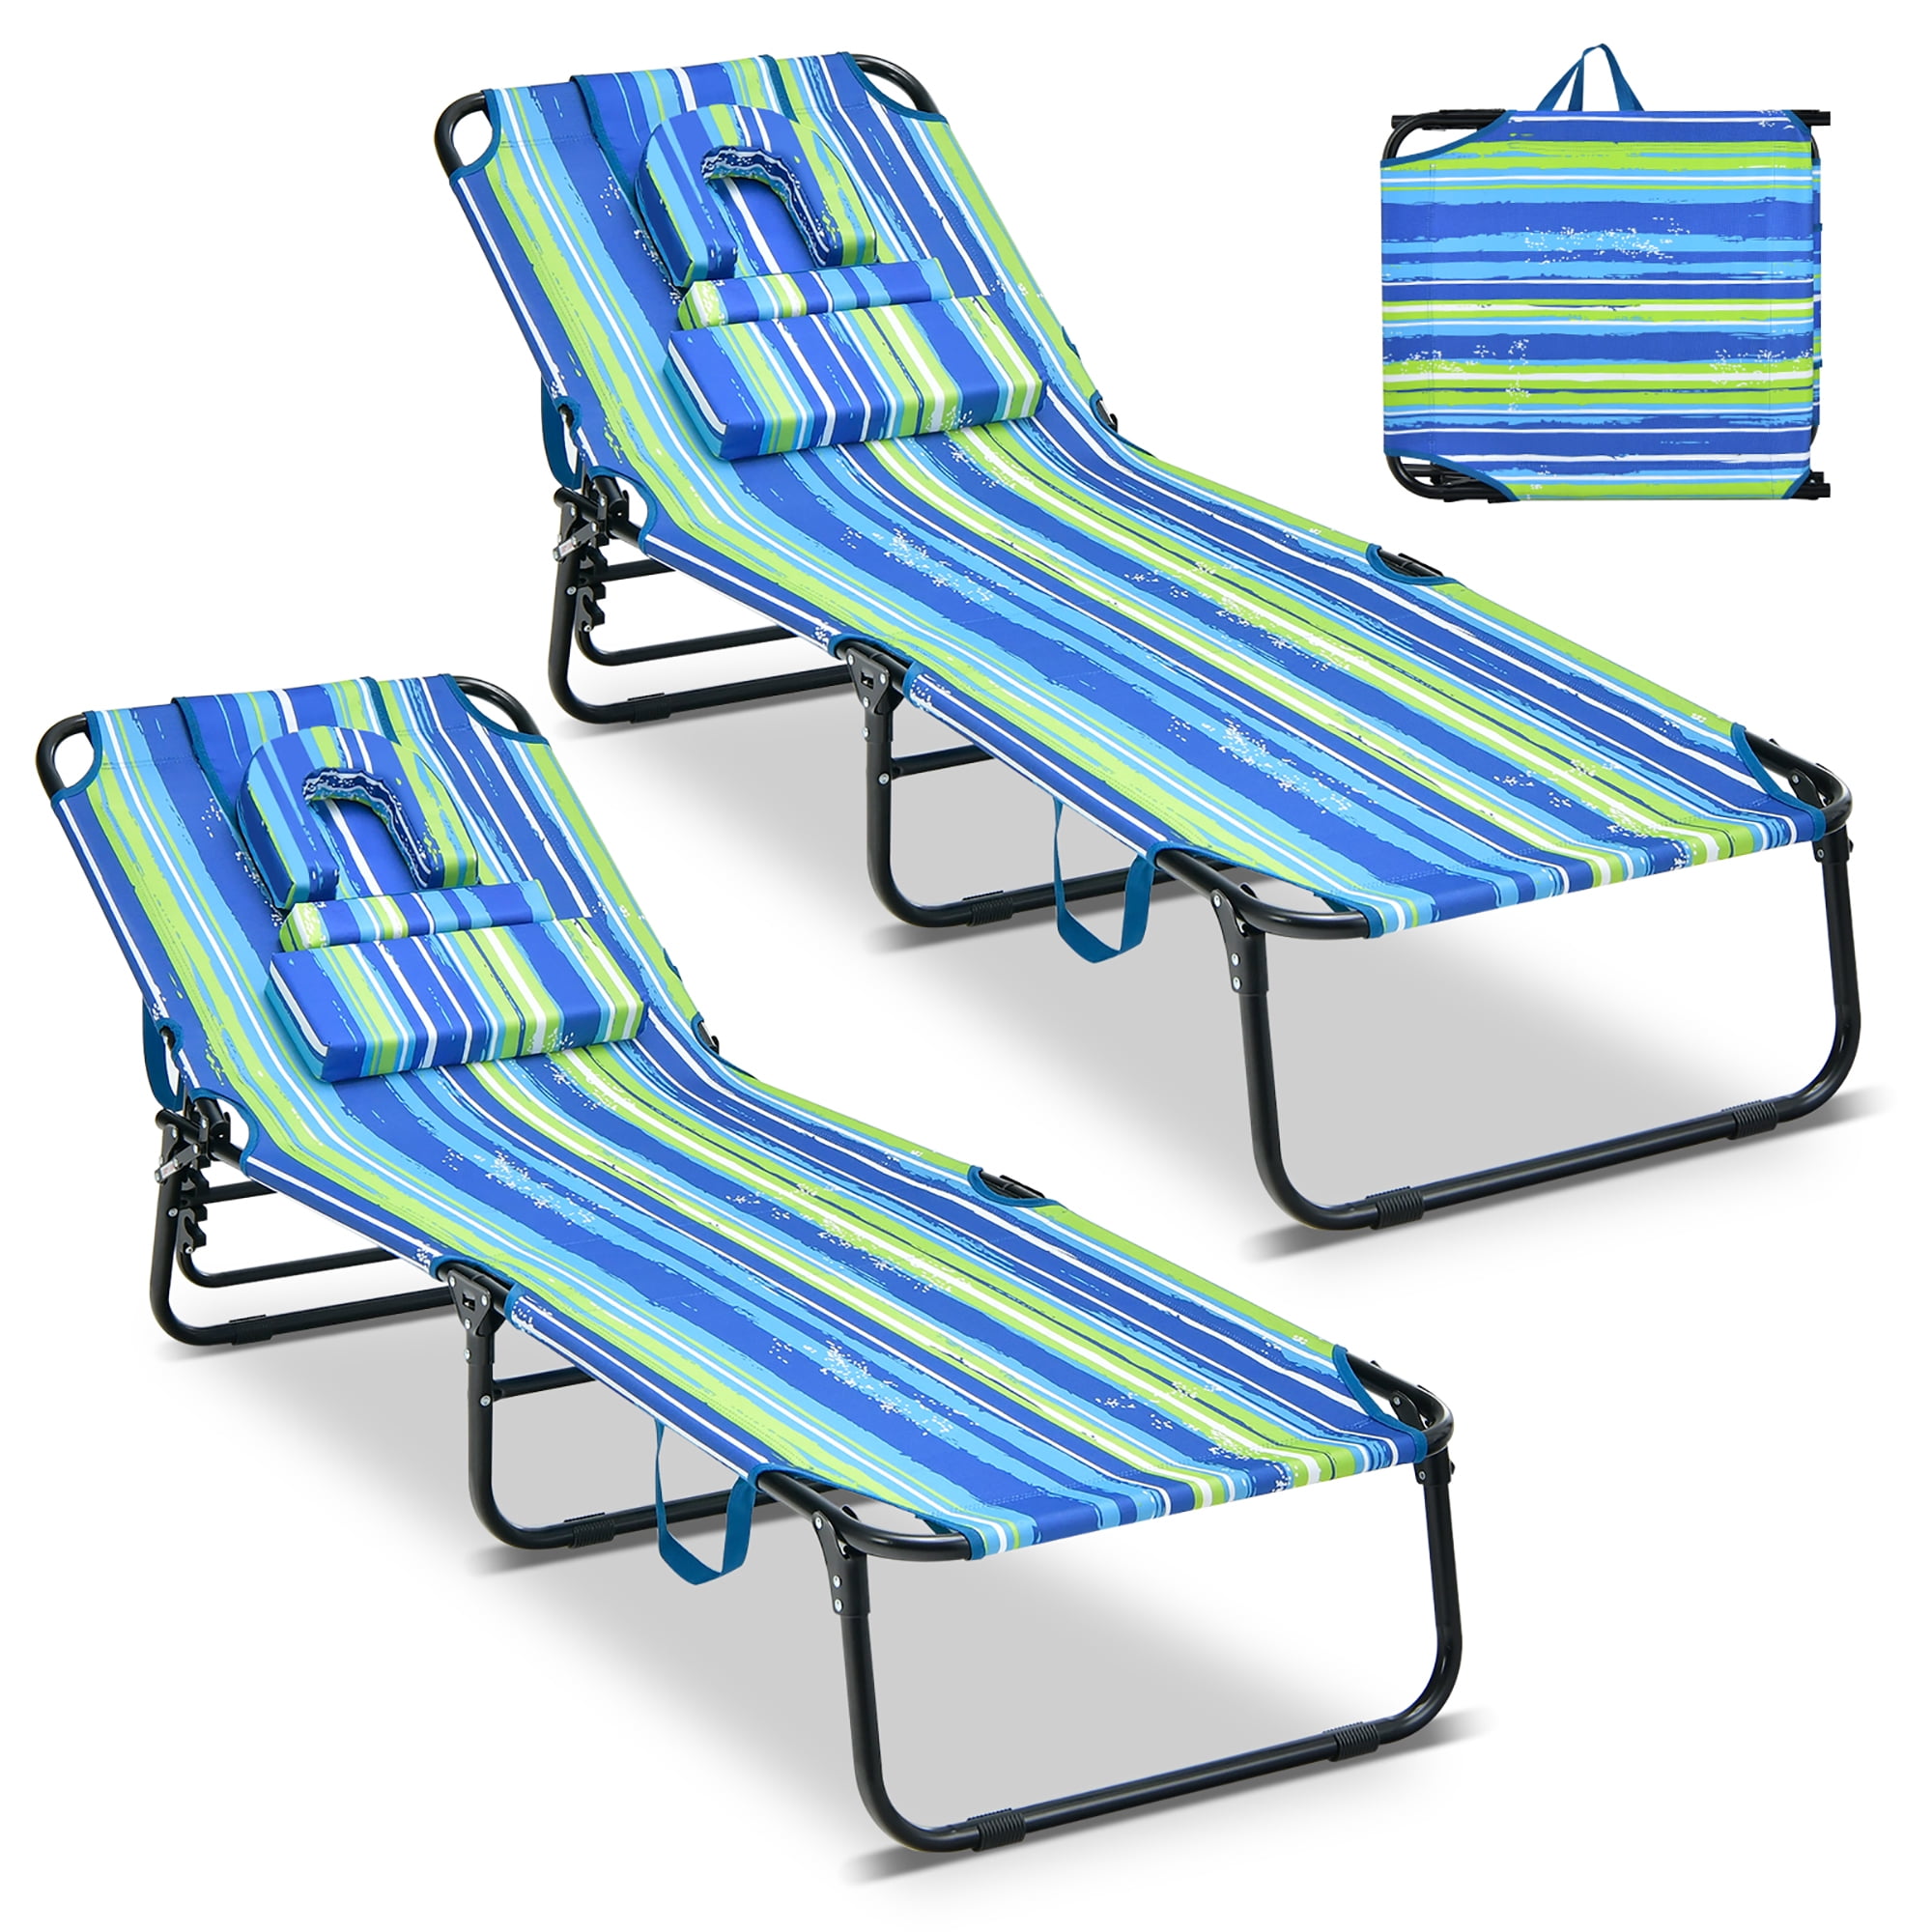 Costway 2 PCS Beach Chaise Lounge Chair with Face Hole Pillows & Adjustable Backrest Blue & Green - image 1 of 10